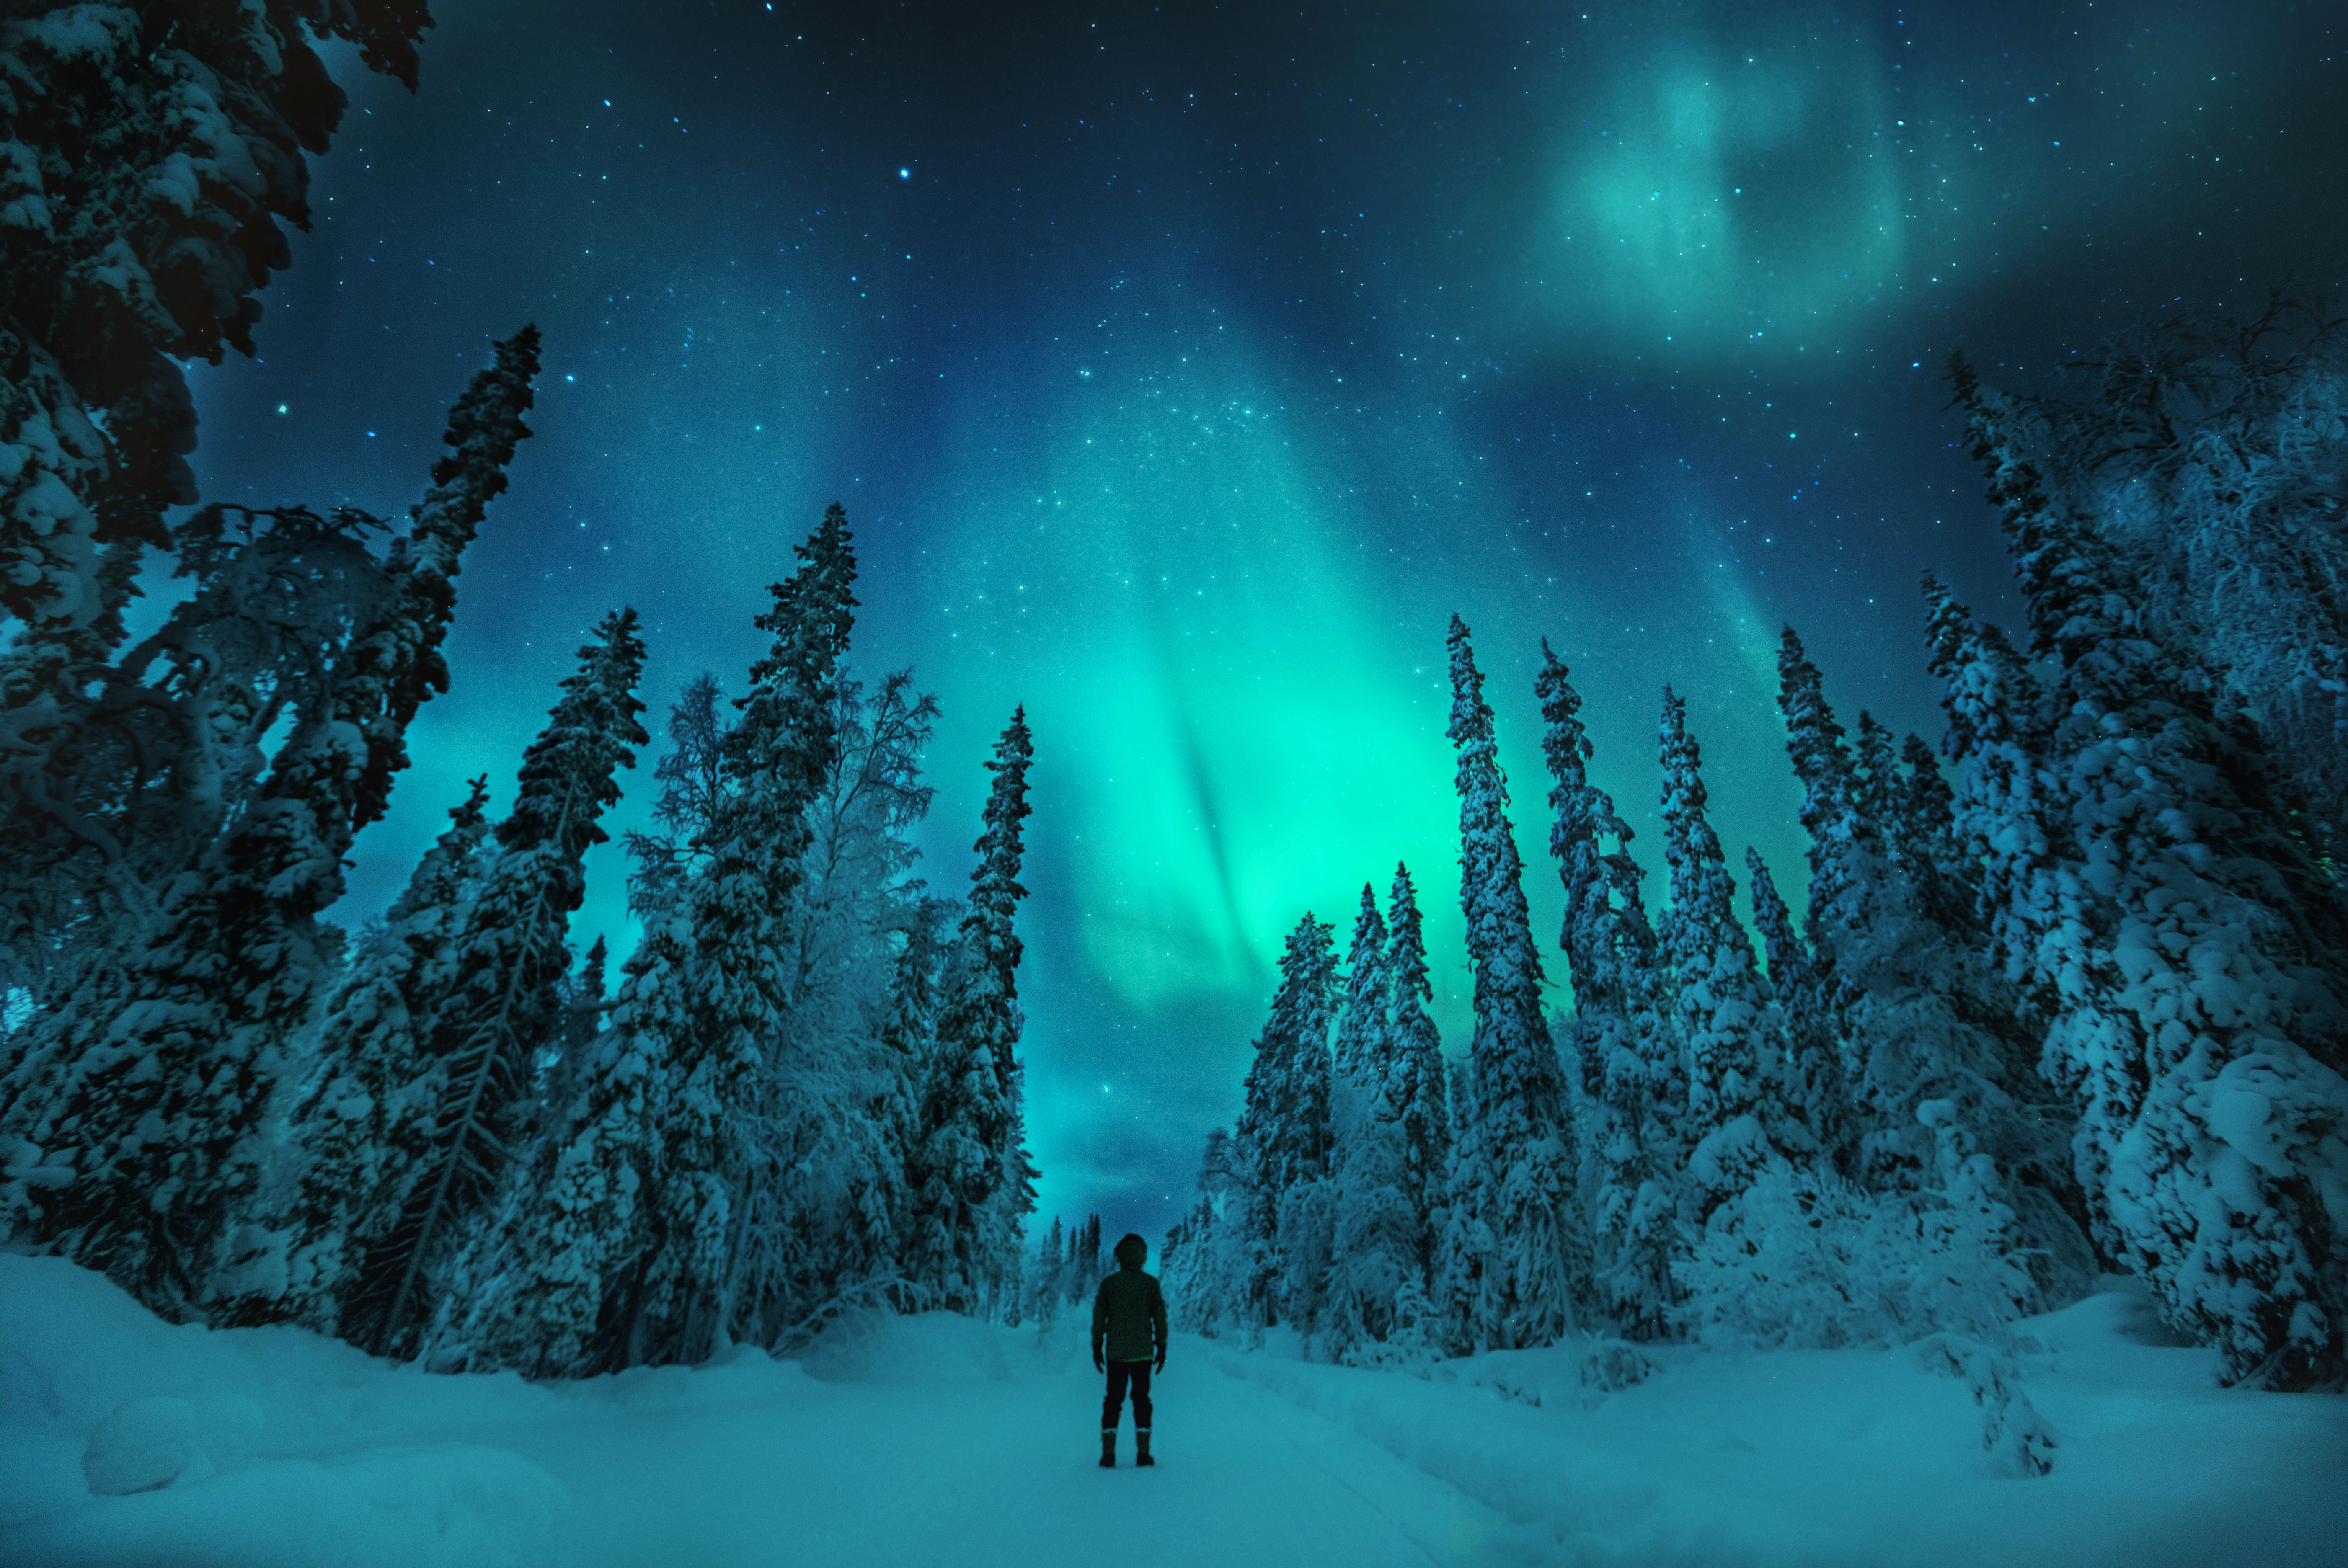 A person stands in the snowy woods looking up at the Northern Lights.